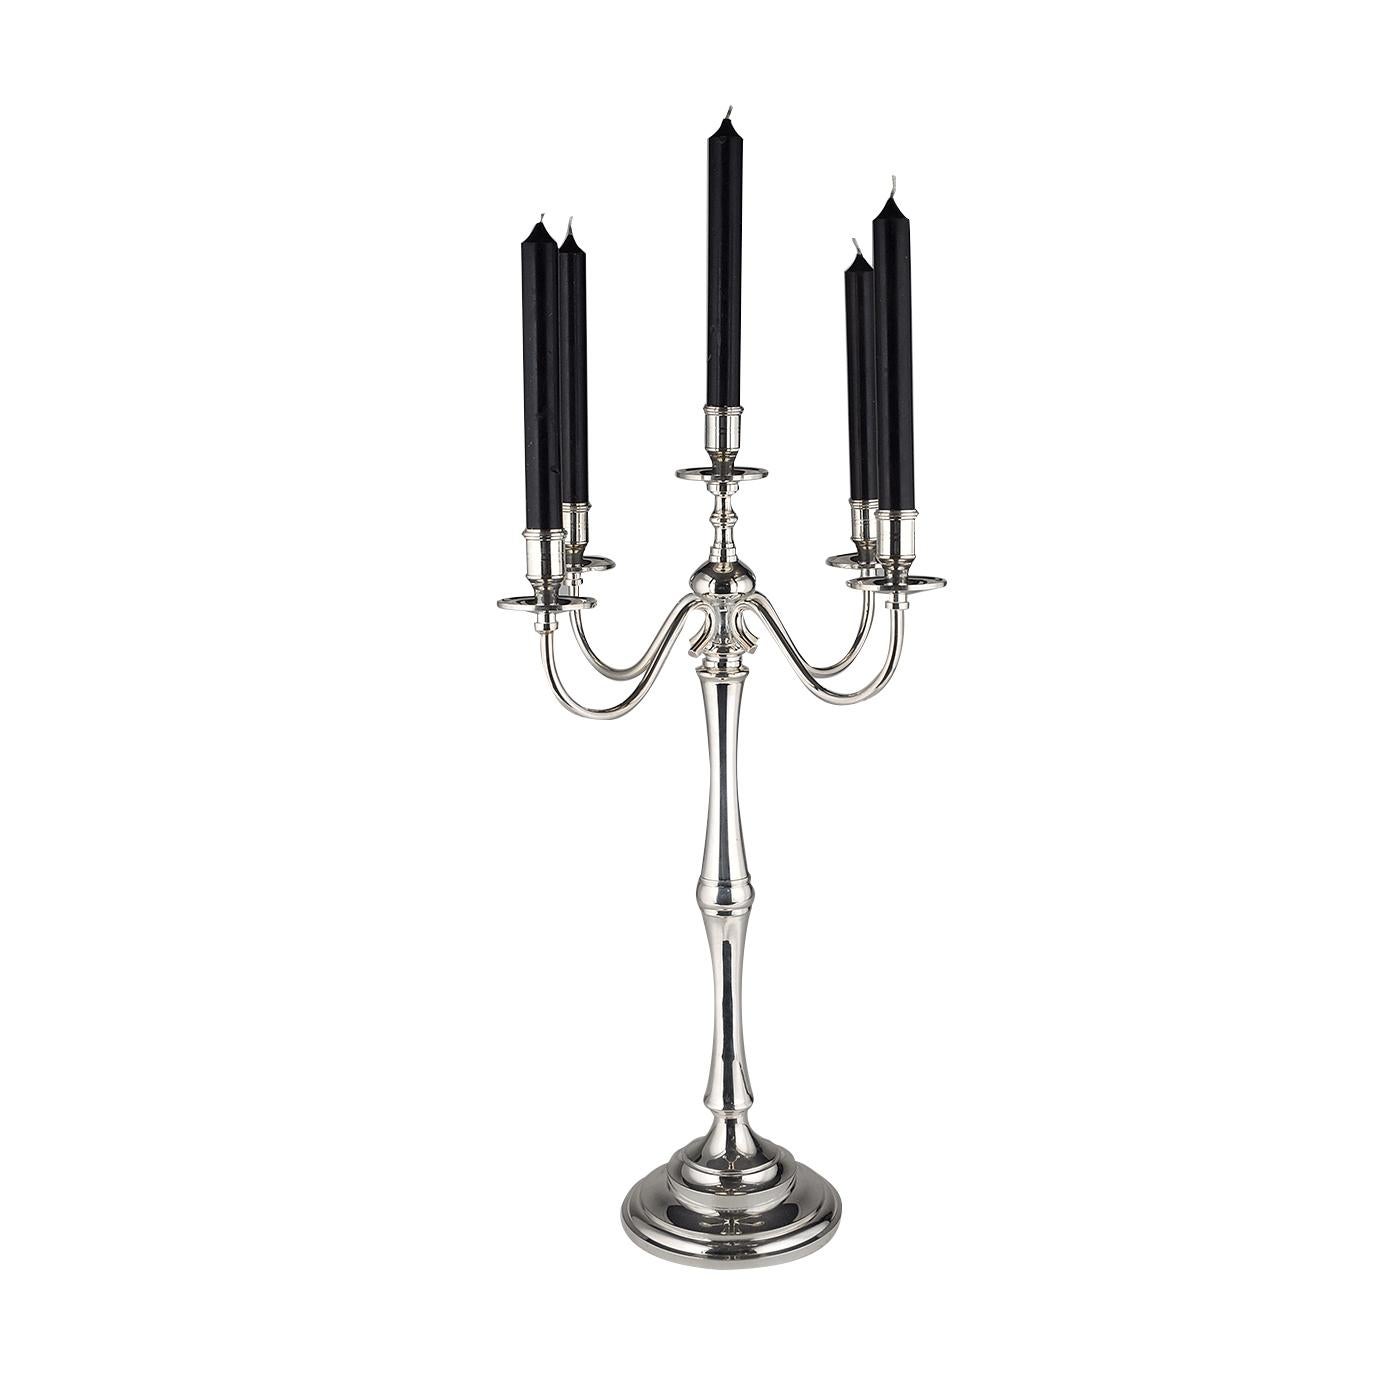 This candleholder has a classic charm and will be an elegant addition to any home, thanks to its exquisite silhouette, the sinuous curves of its six arms, and the cool glow of the silver with which it is plated. It can be used to add a touch of